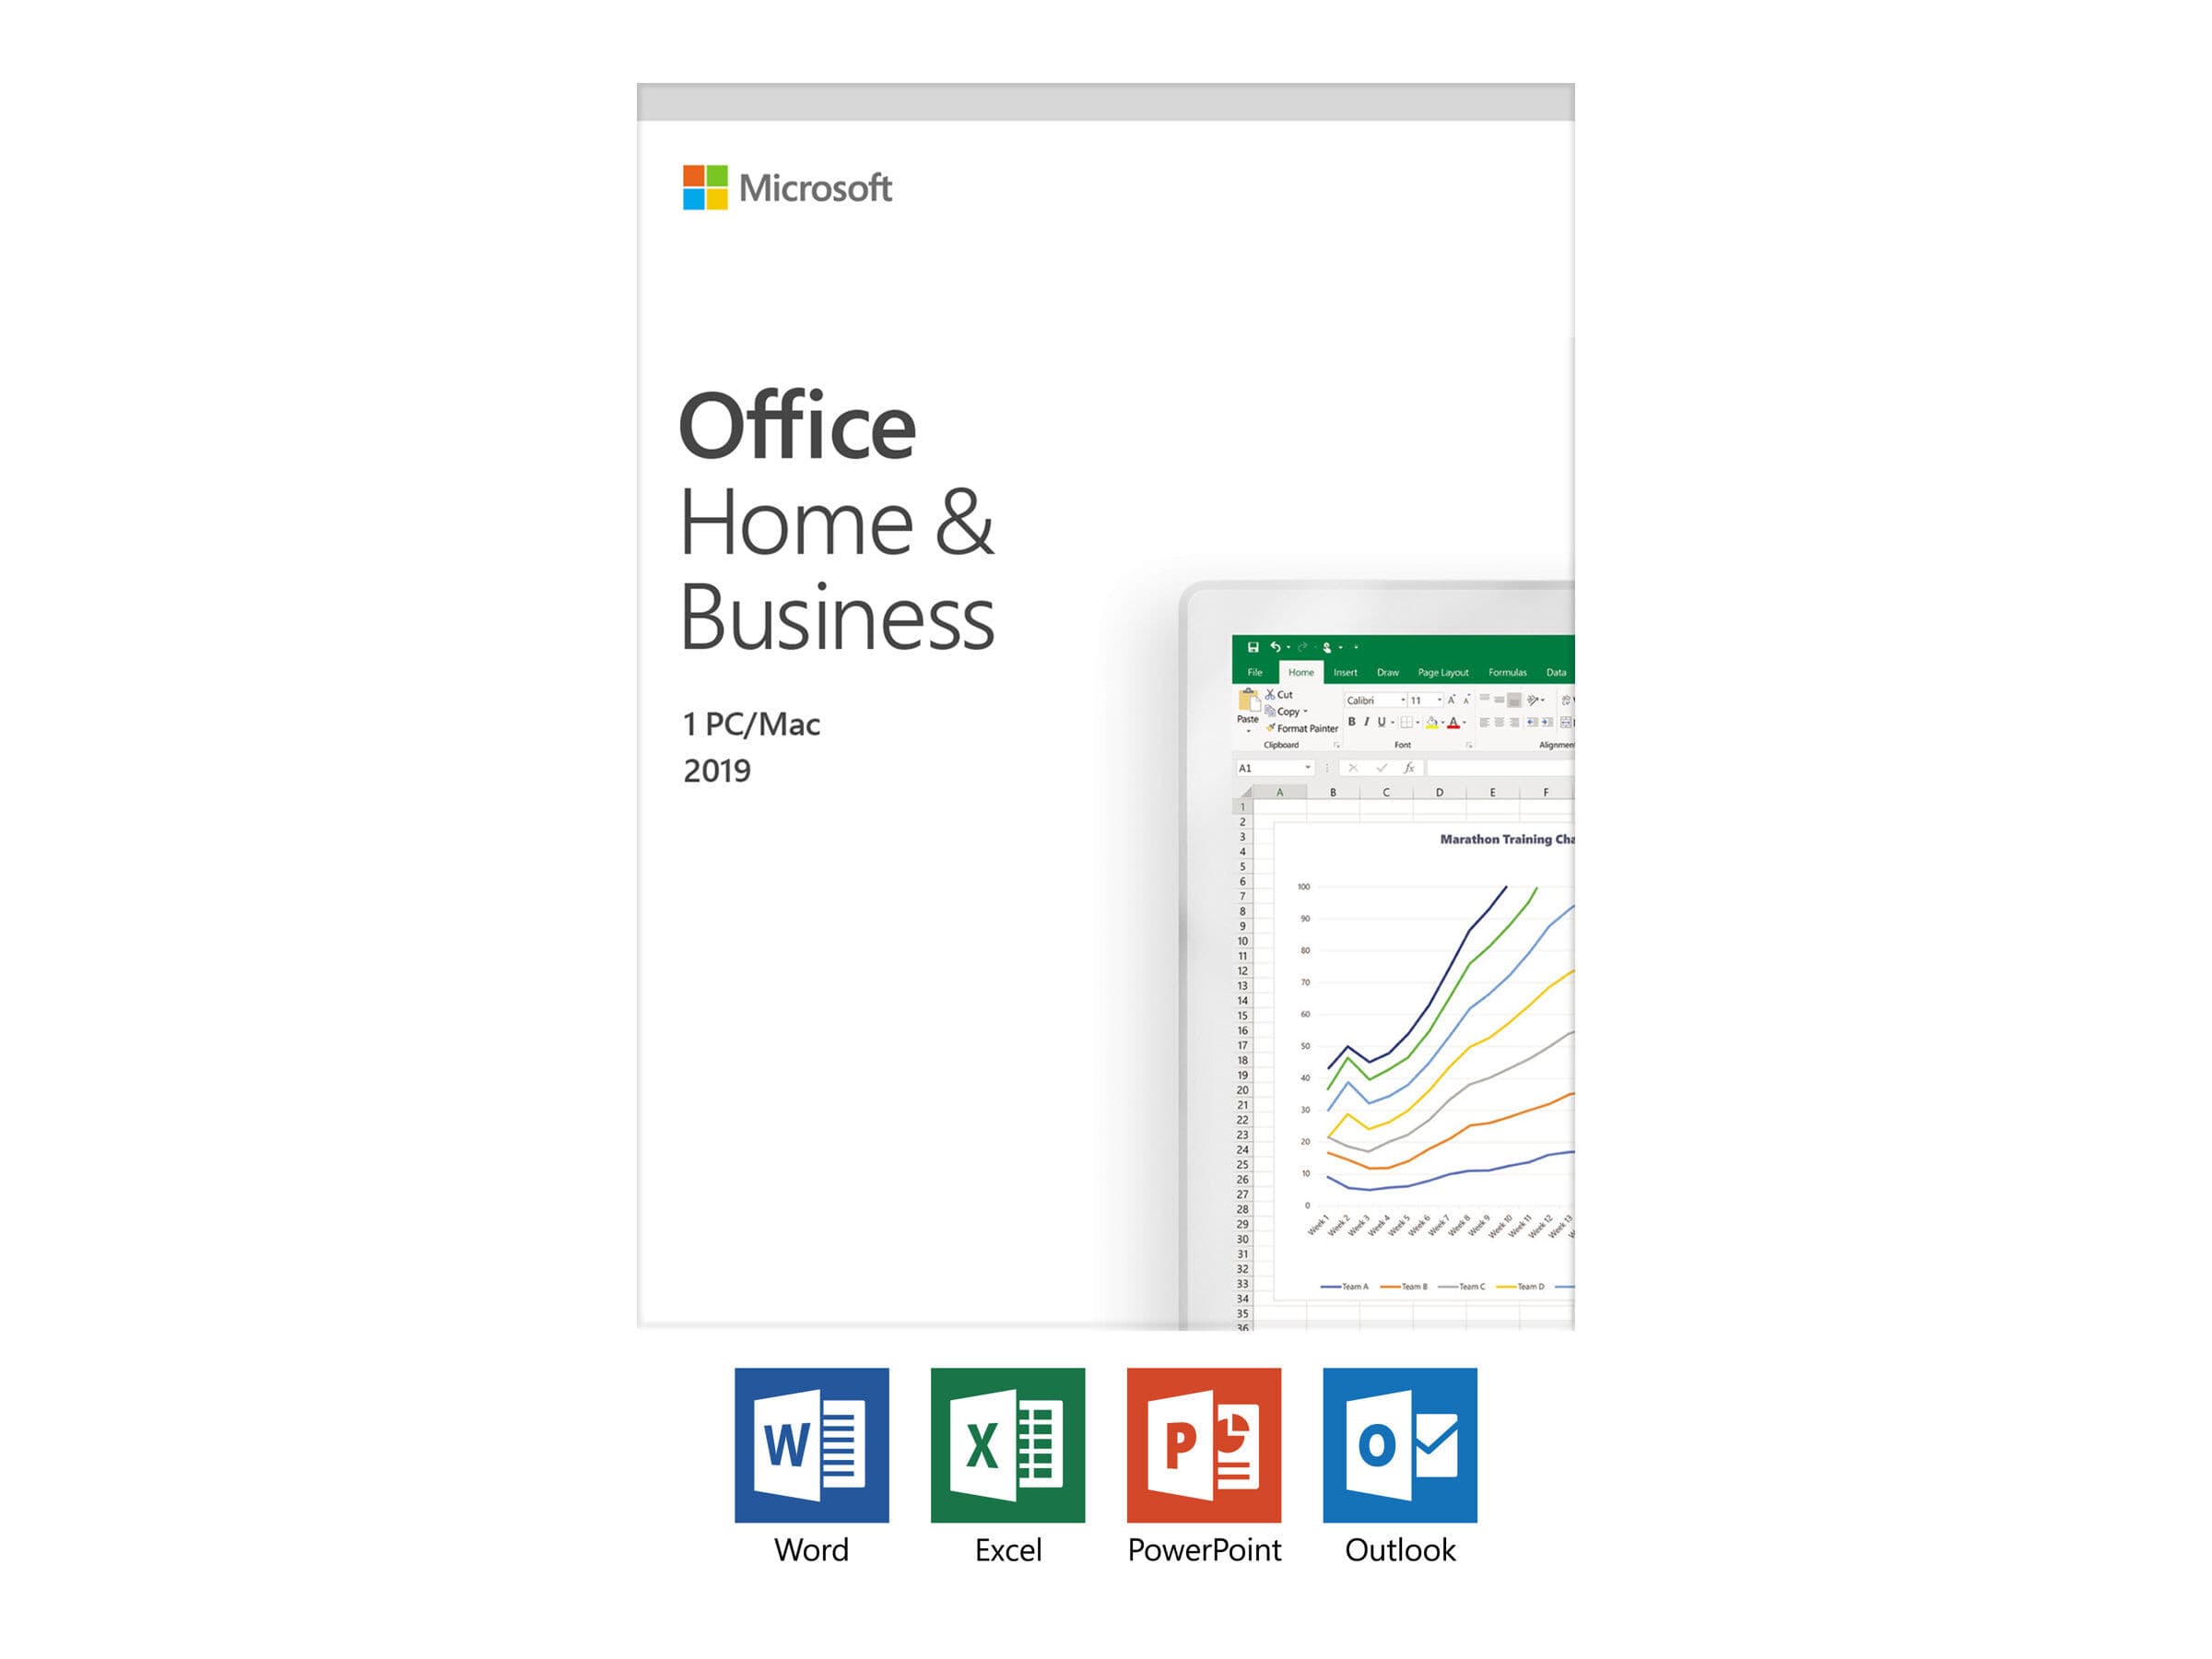 office 2019 home and student mac